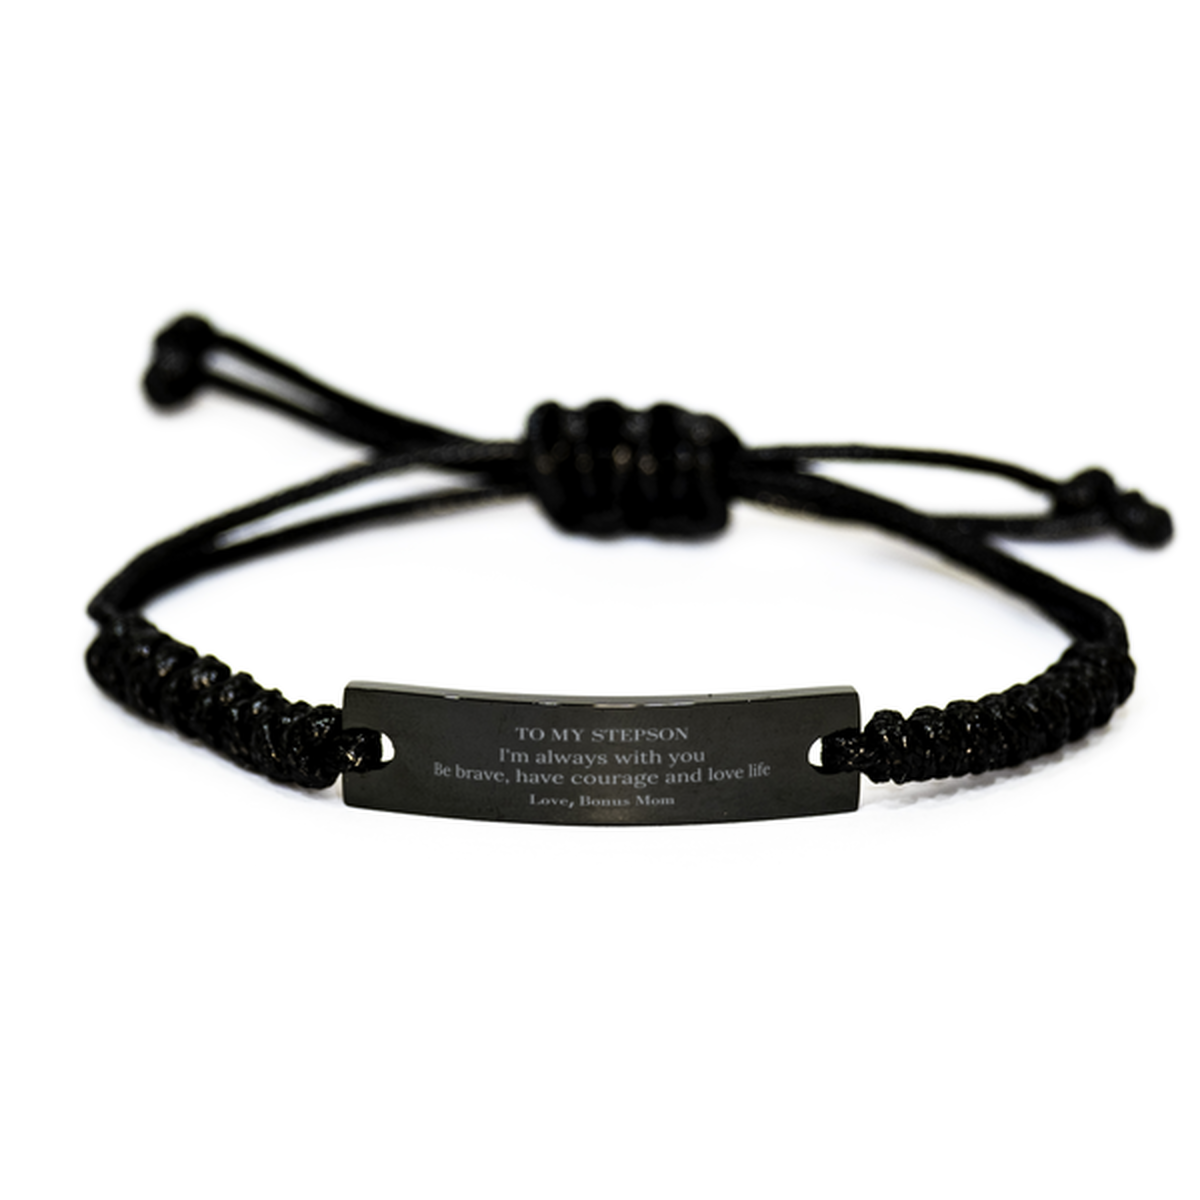 To My Stepson Gifts from Bonus Mom, Unique Black Rope Bracelet Inspirational Christmas Birthday Graduation Gifts for Stepson I'm always with you. Be brave, have courage and love life. Love, Bonus Mom